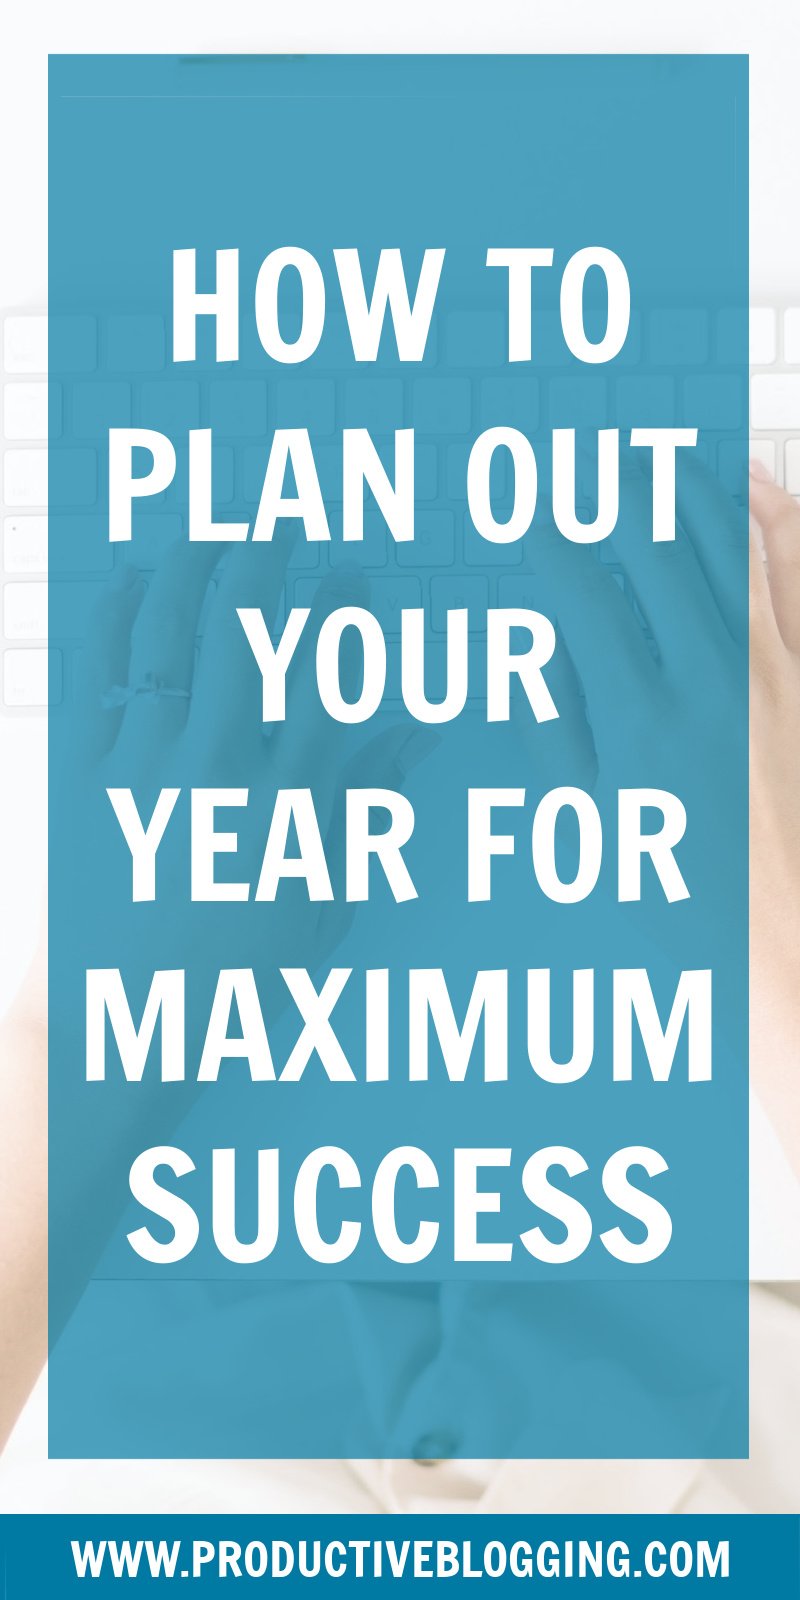 Success won’t land in your lap. If you want to have a successful 2023, you need to make a plan! Here’s a simple step-by-step process to help you plan your 2023 for maximum success. #successful2023 #2023success #successfulbusiness #successfulbusiness2023 #2023planning #yearlyplanning #yearlyactionplan #monthlyactionplan #dailyactionplan #todolist #dailytodos #dailyplanning #planning #timemanagement #2023goals #blogginggoals #bloggingtips #productivitytips #productiveblogging #blogsmarternotharder